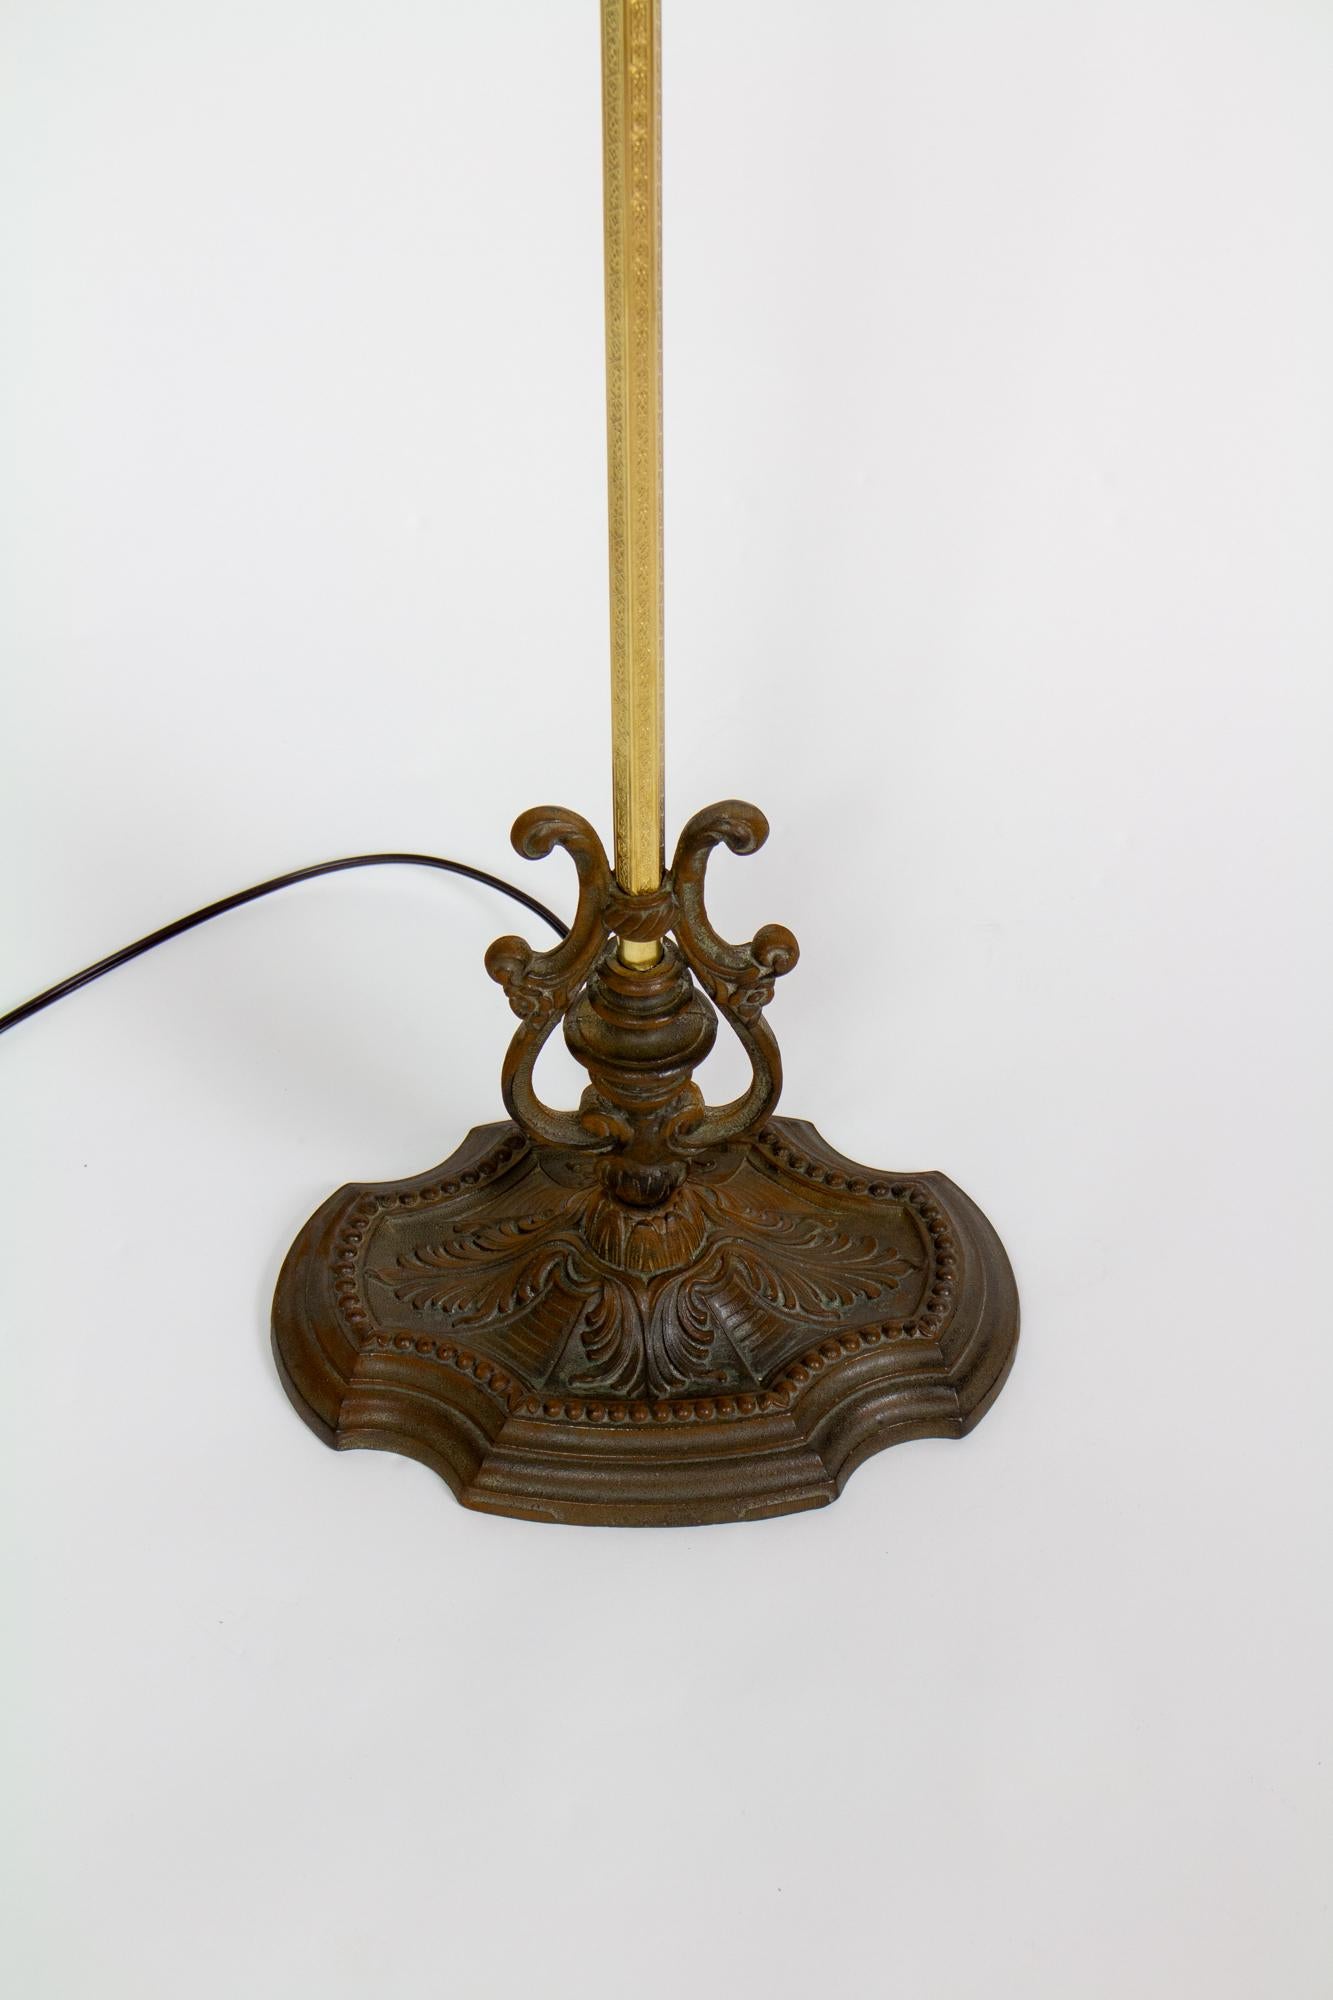 Ornate Rococo Revival Bridge Lamp with Pleated and Ruched off White Silk Shade In Excellent Condition For Sale In Canton, MA